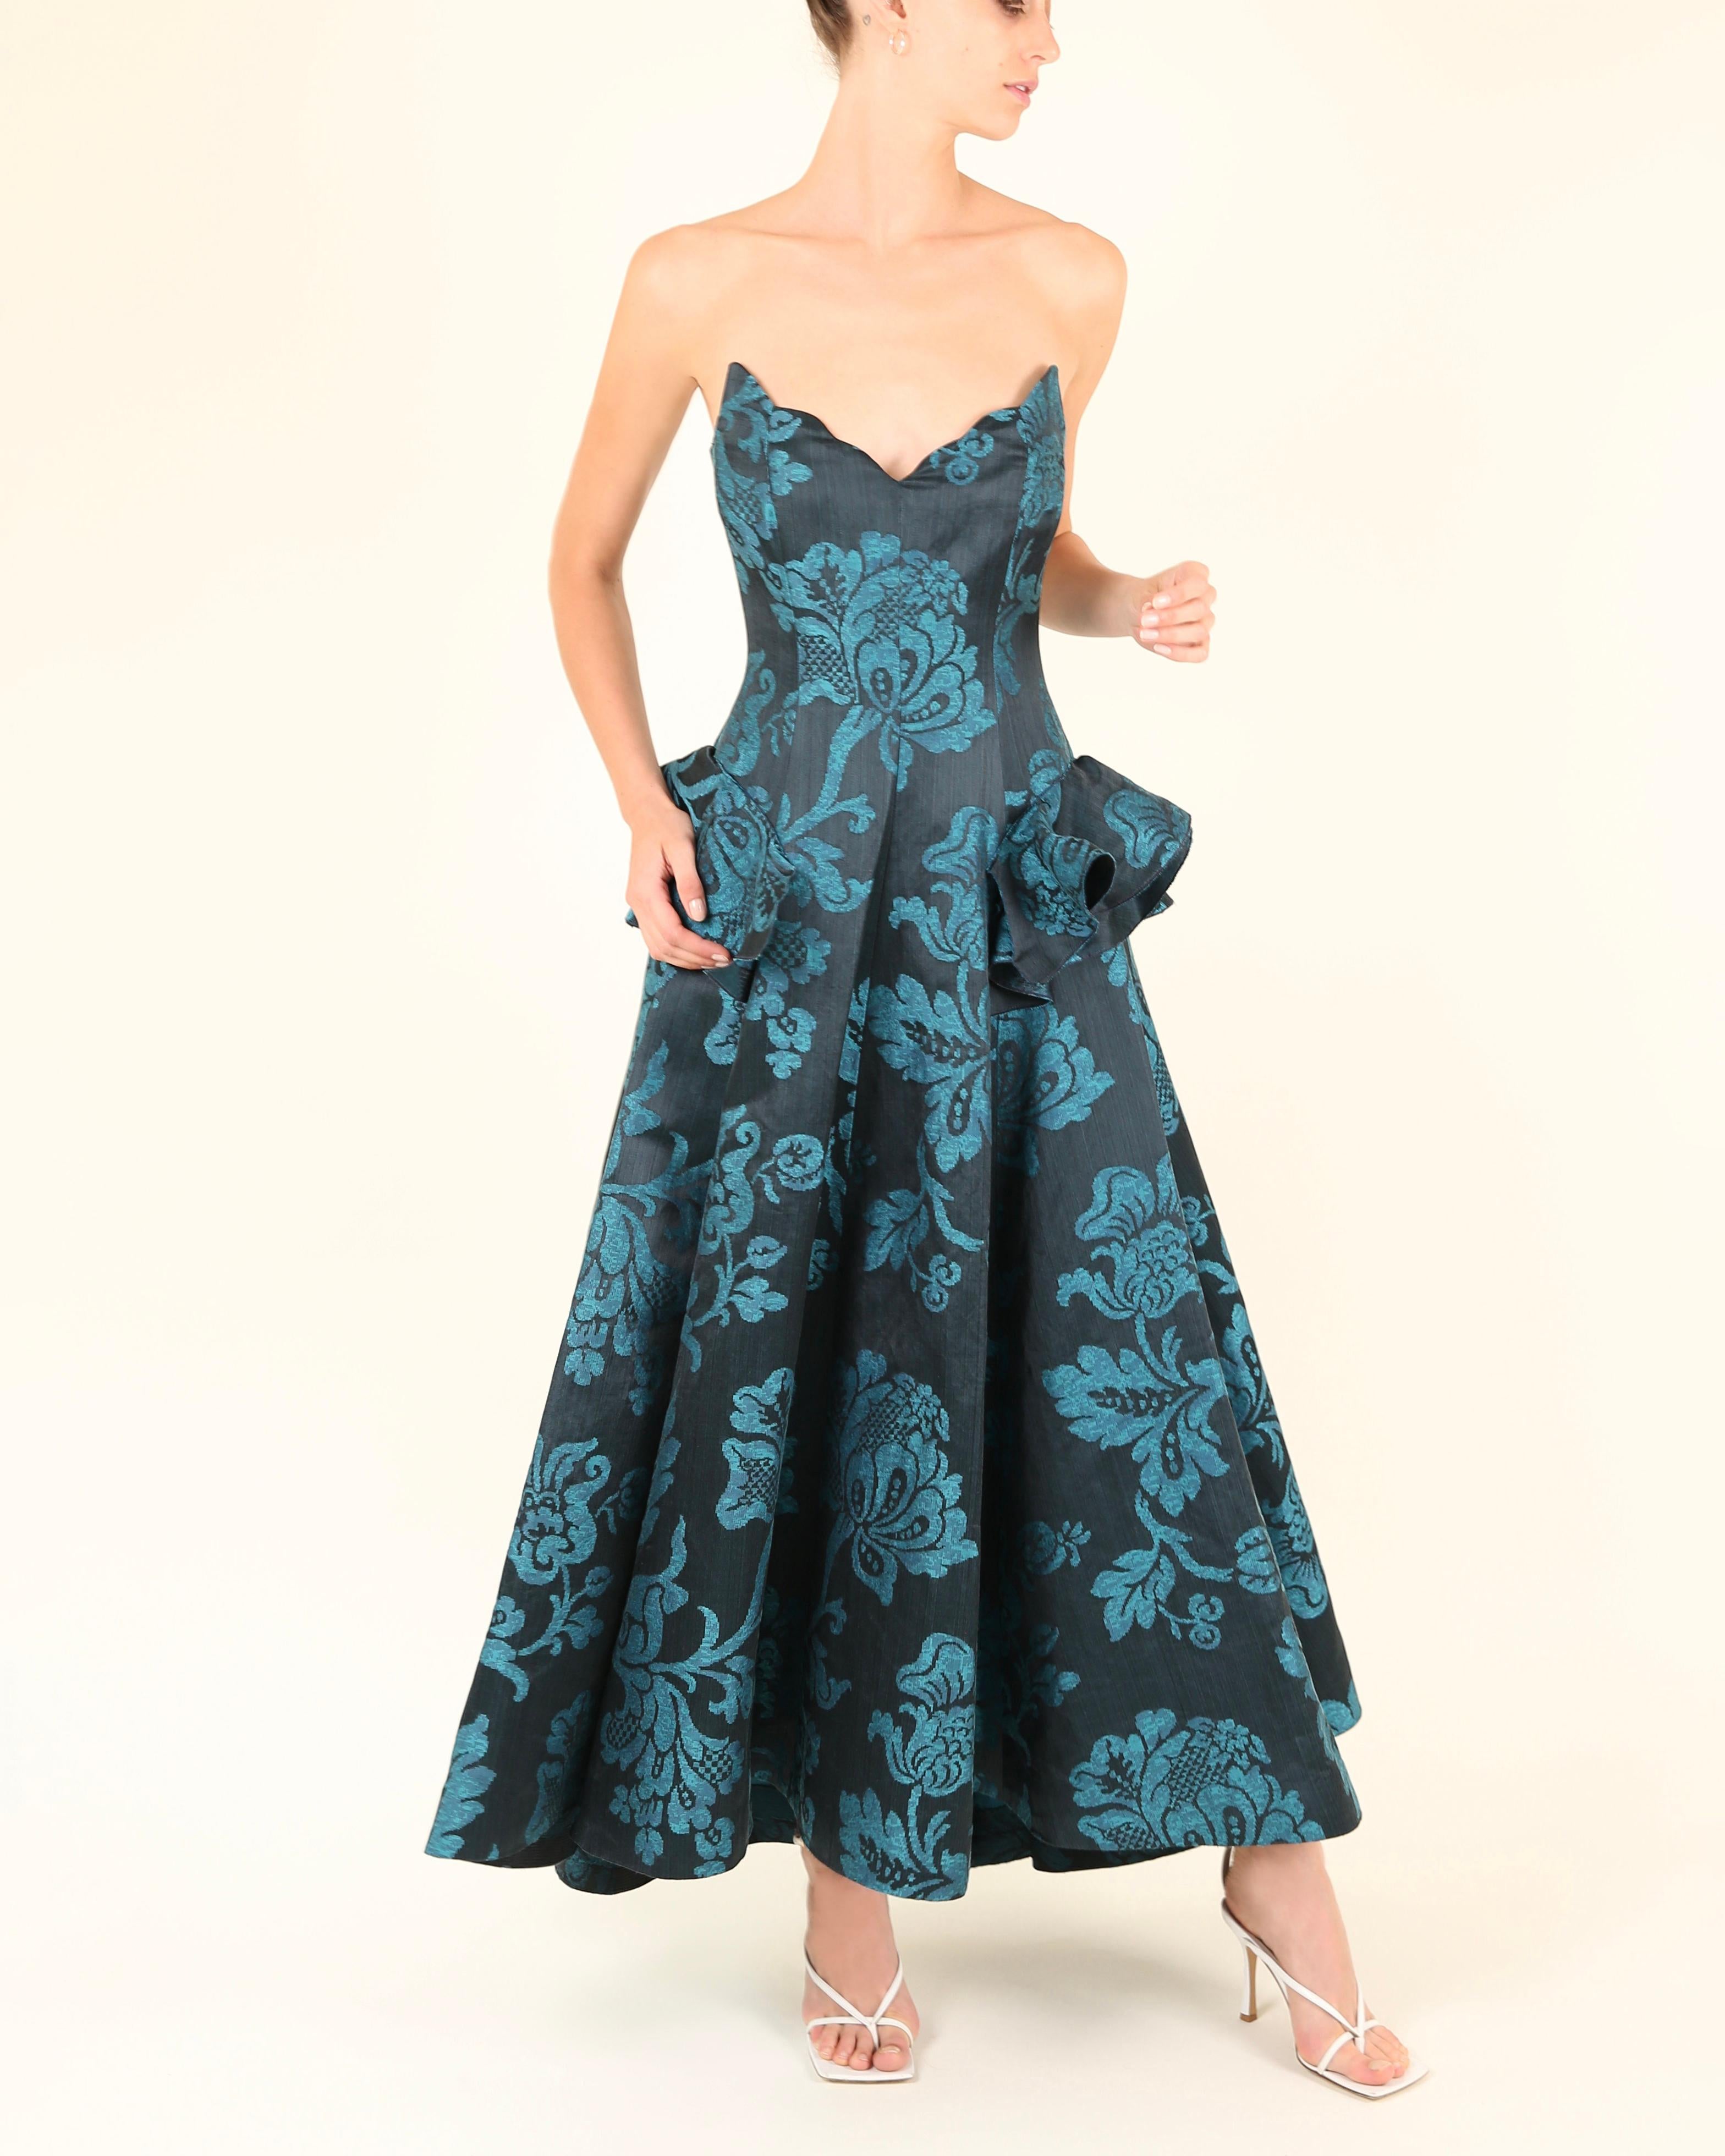 Oscar de la Renta F/W06 strapless floral blue teal fit and flare dress gown XS In Excellent Condition For Sale In Paris, FR